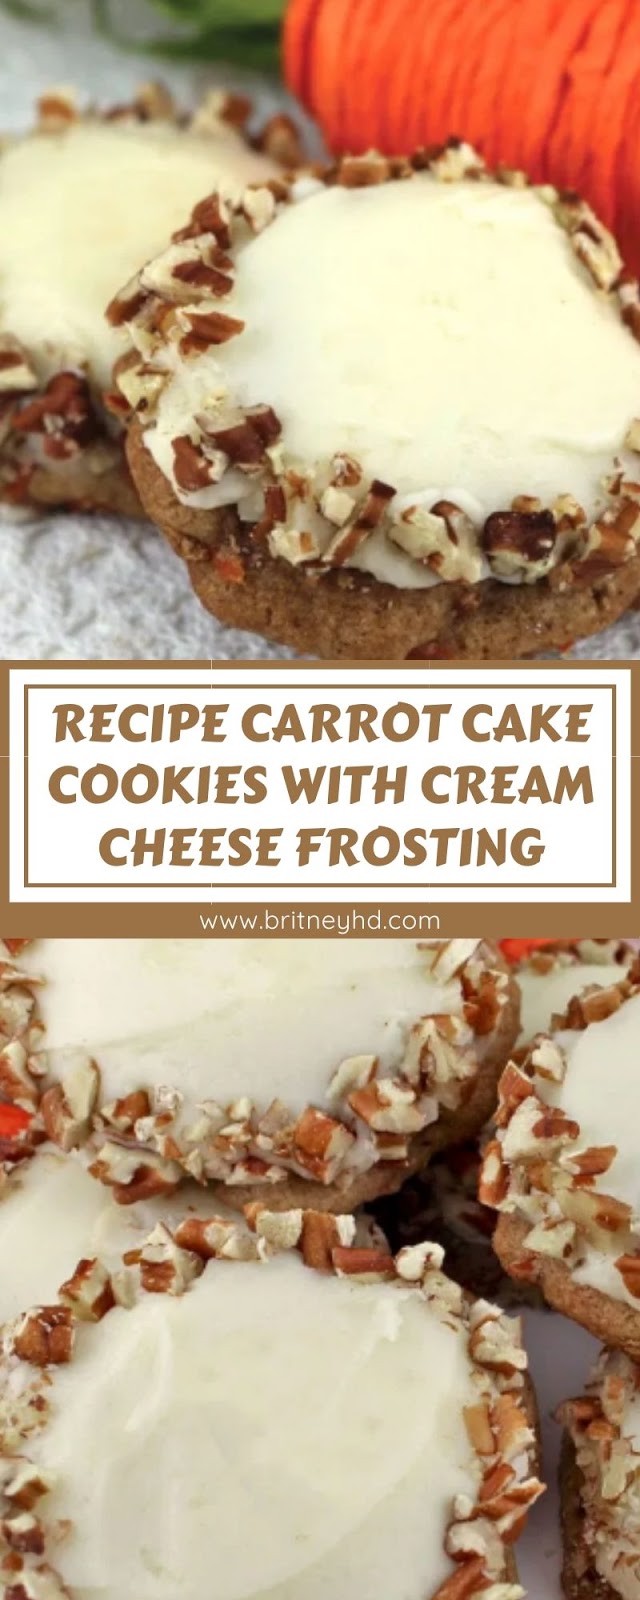 RECIPE CARROT CAKE COOKIES WITH CREAM CHEESE FROSTING